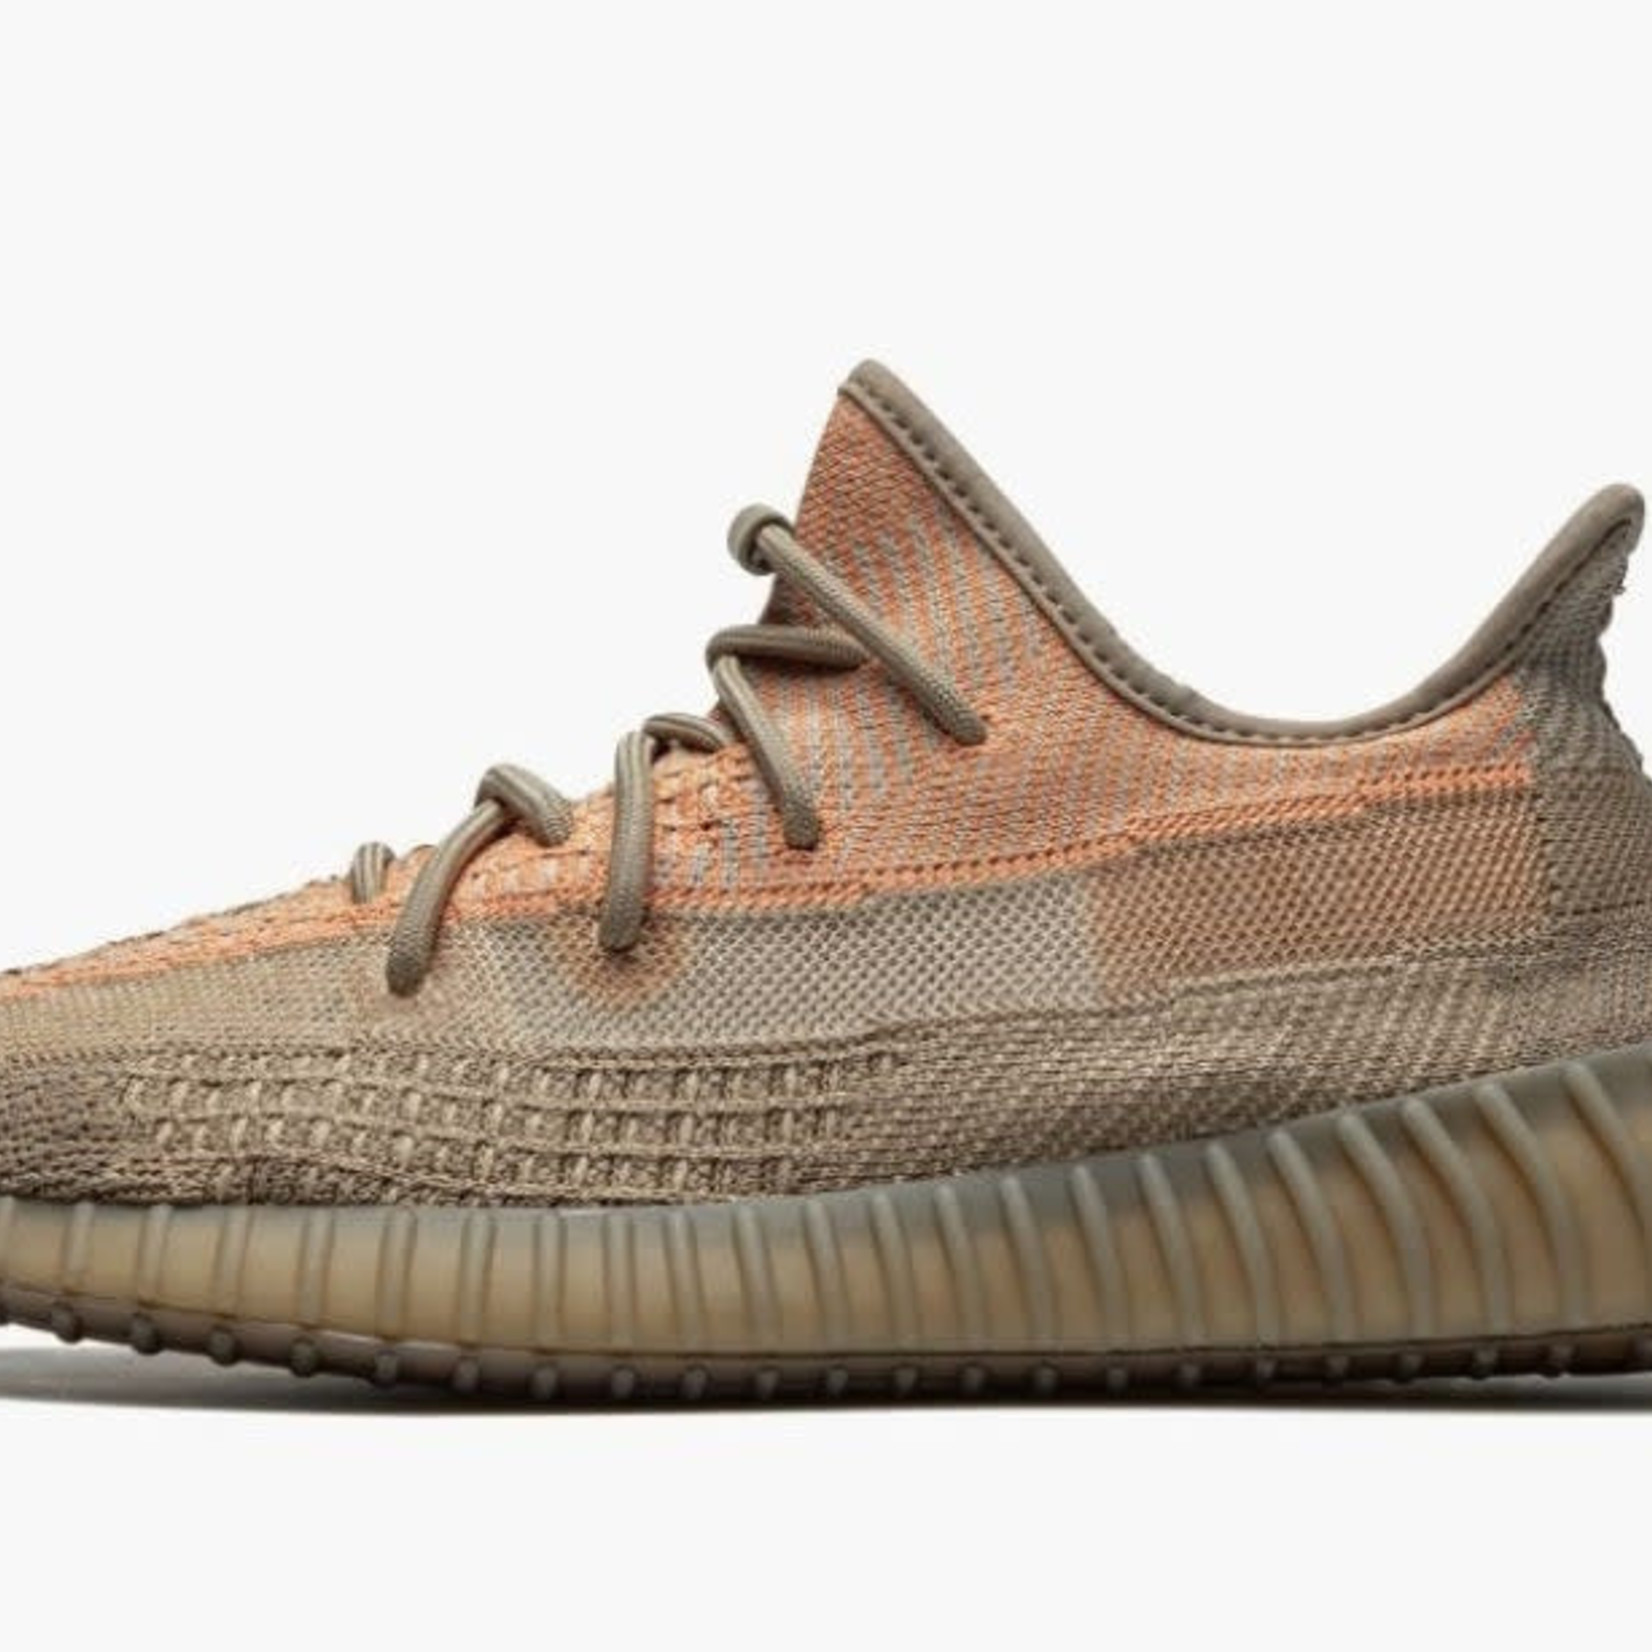 Yeezy Boost 350 "Sand Taupe"